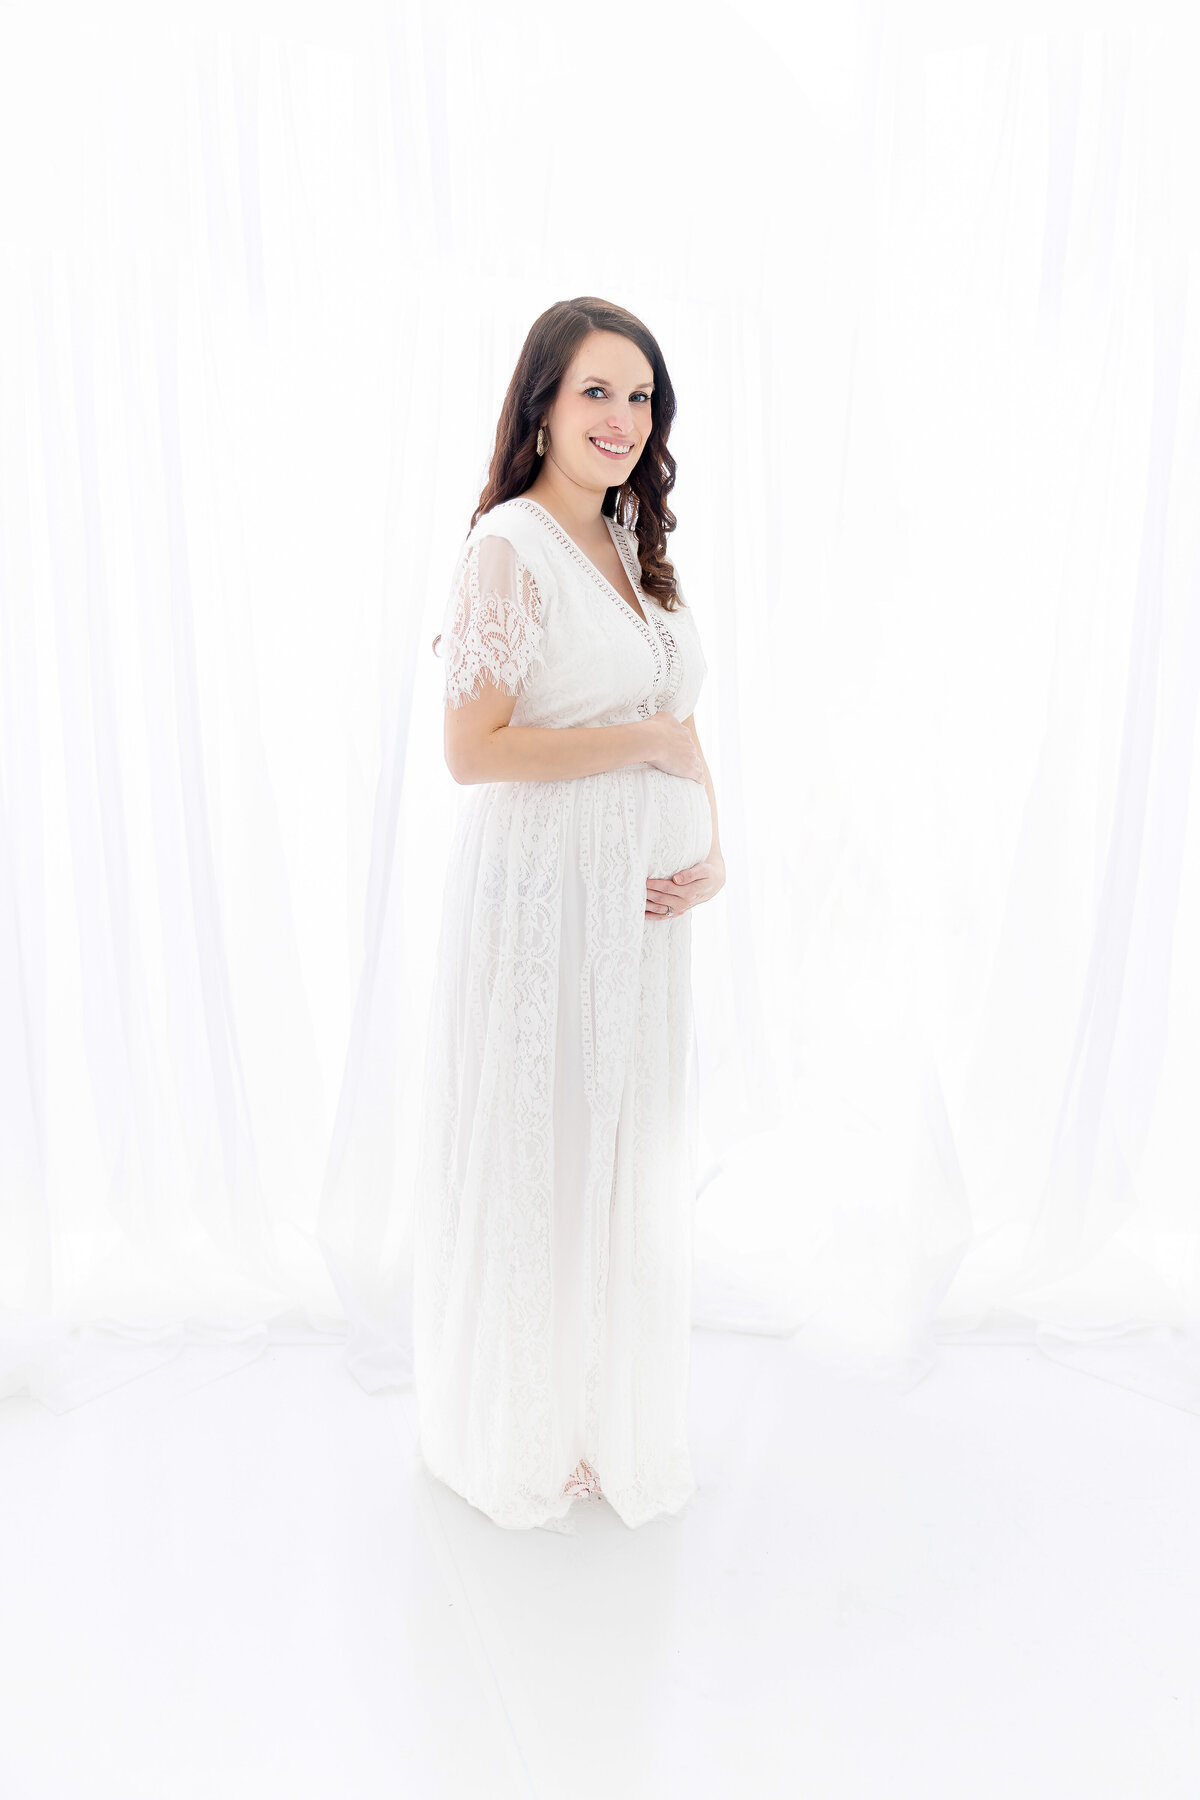 pregnant mother holding her belly in a white dress smiling at the camera